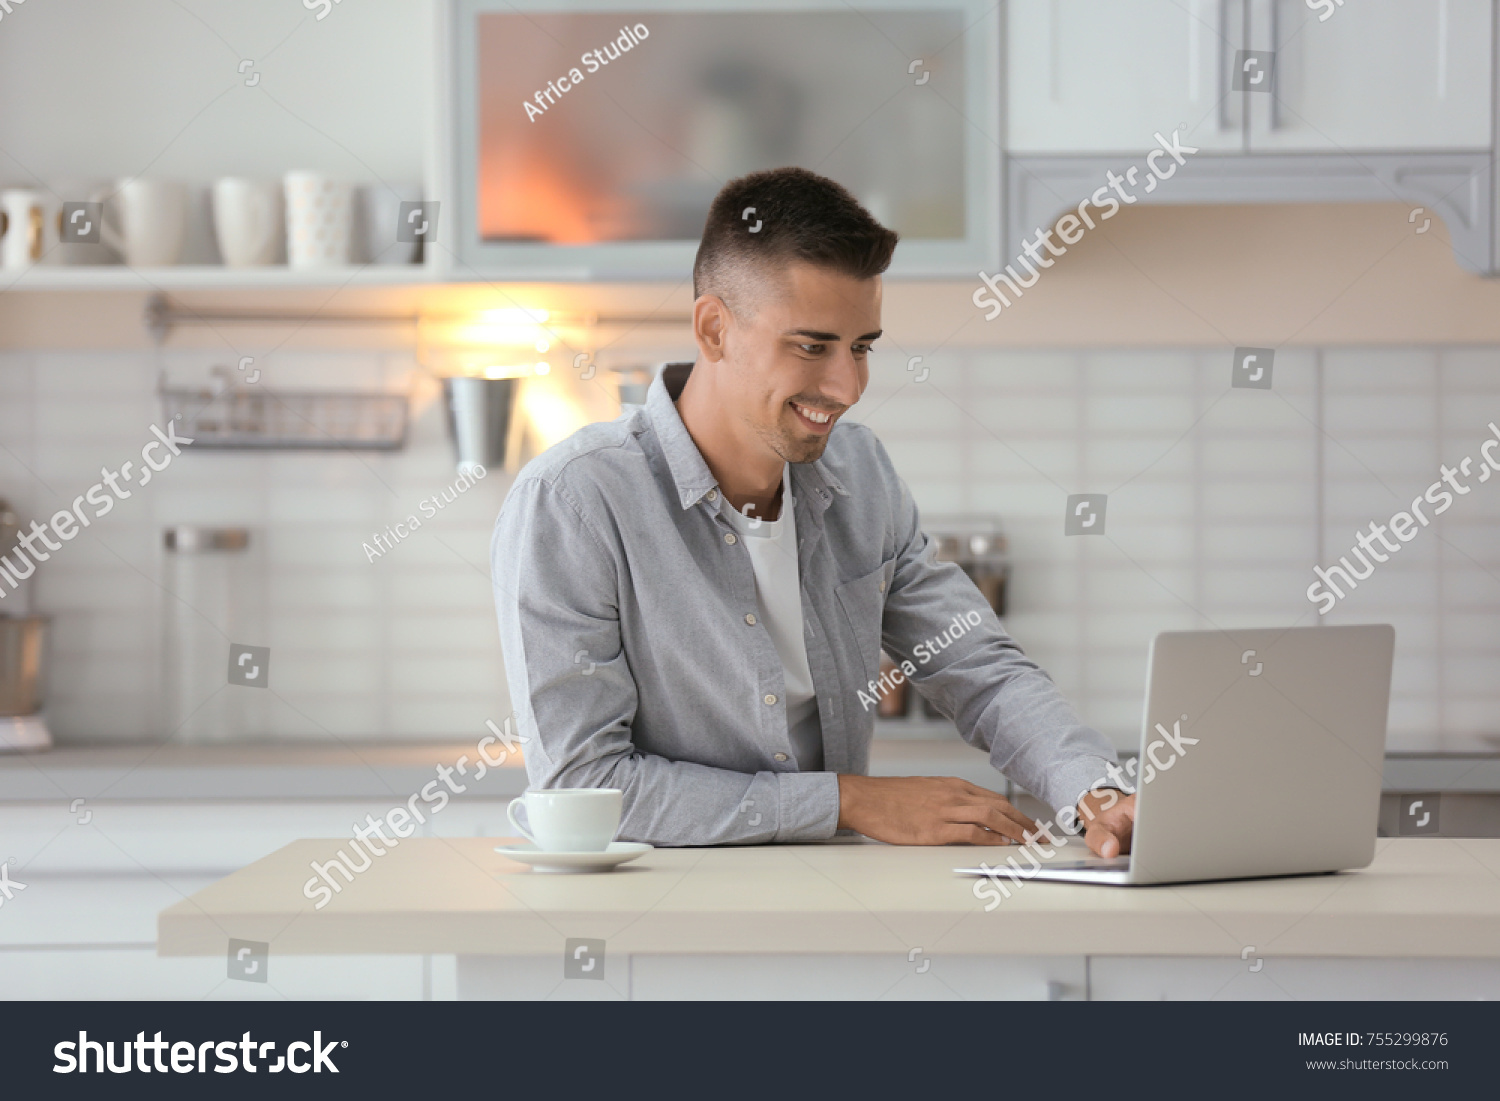 Young man using laptop at table in kitchen #755299876